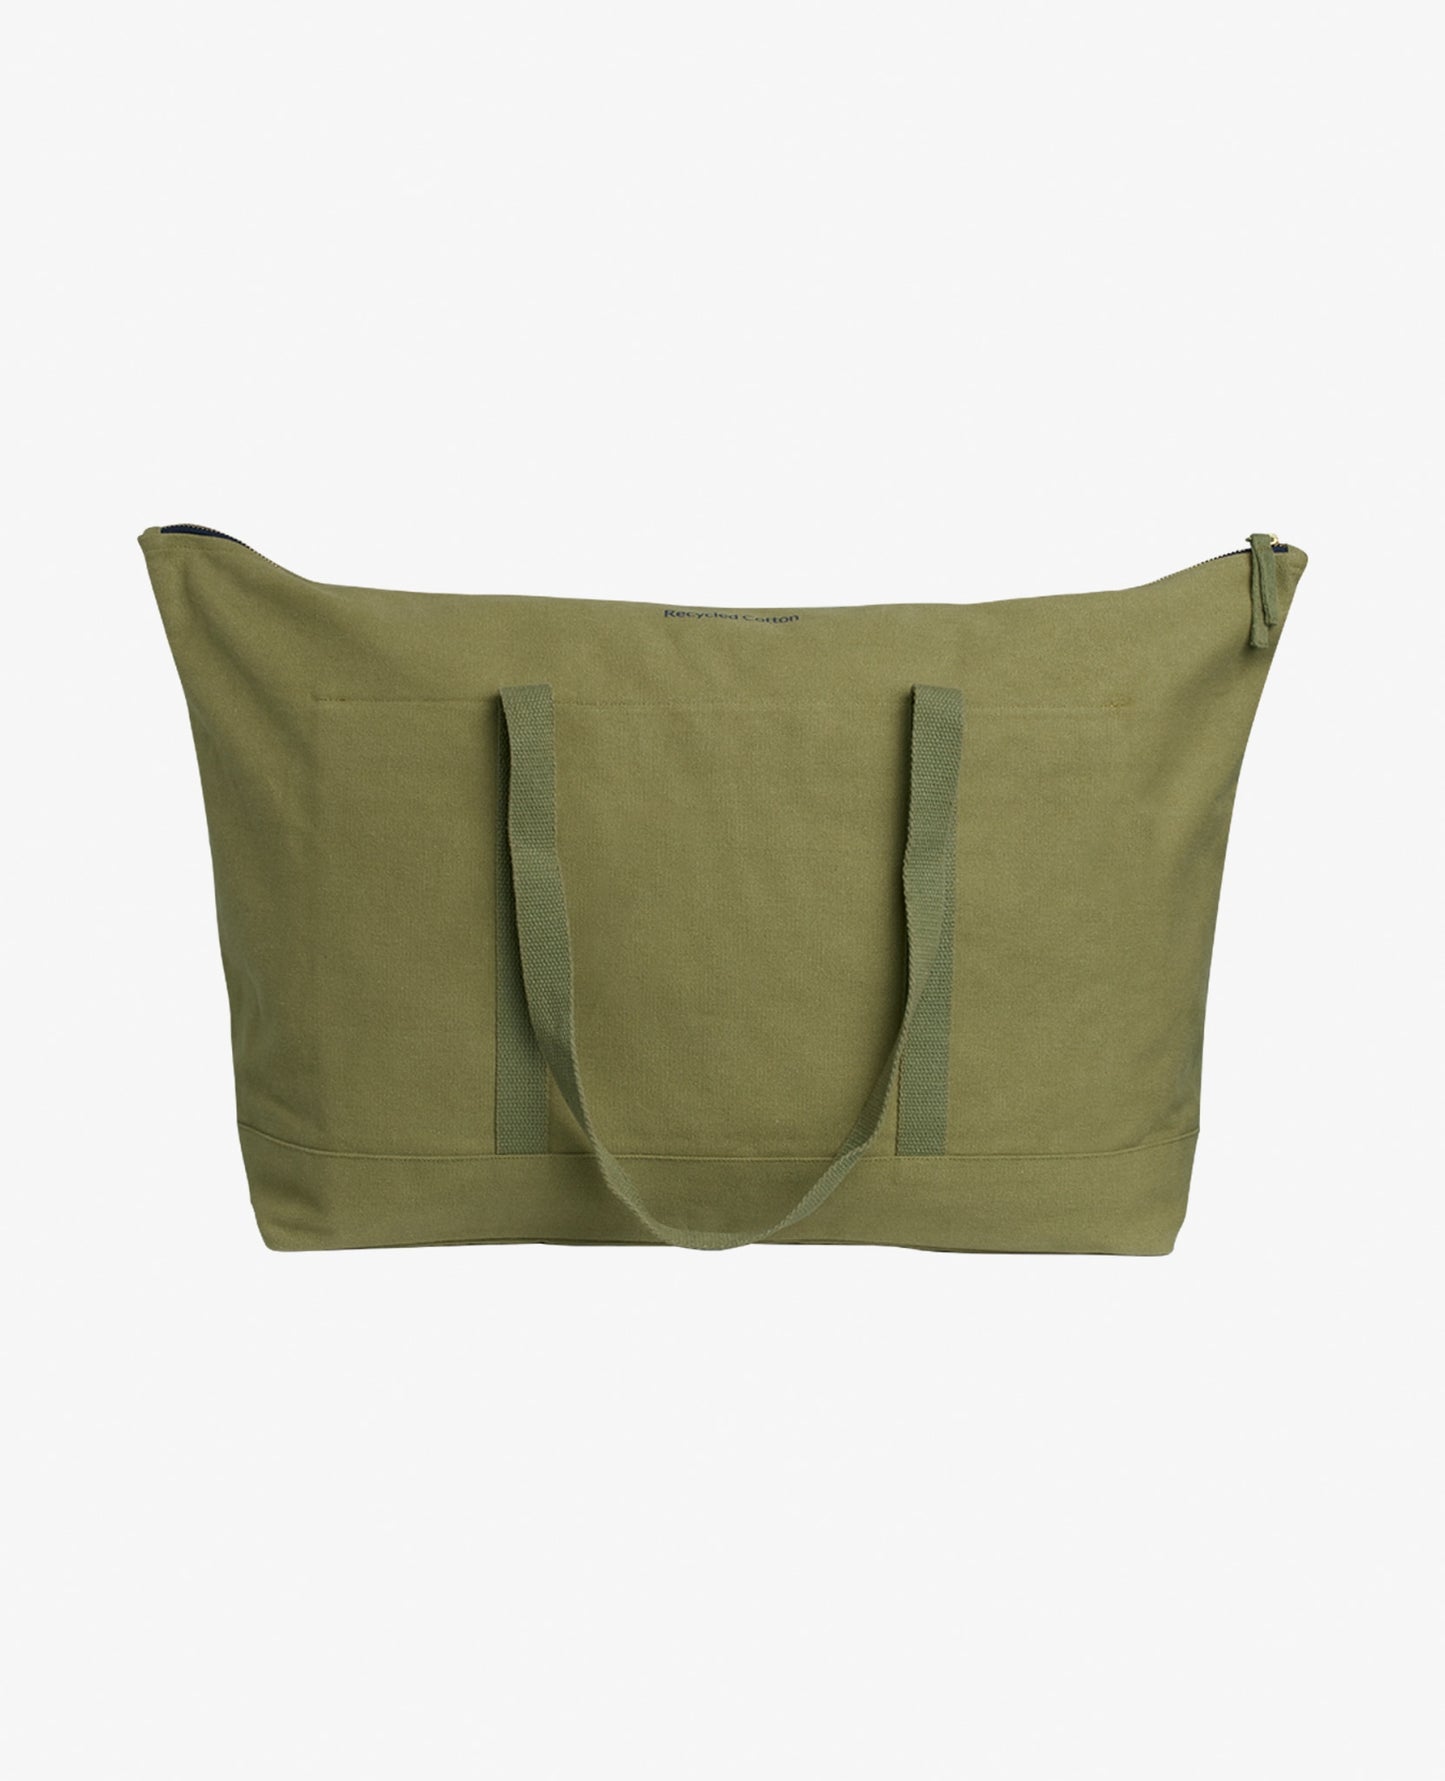 RECYCLED COTTON CANVAS BAGS